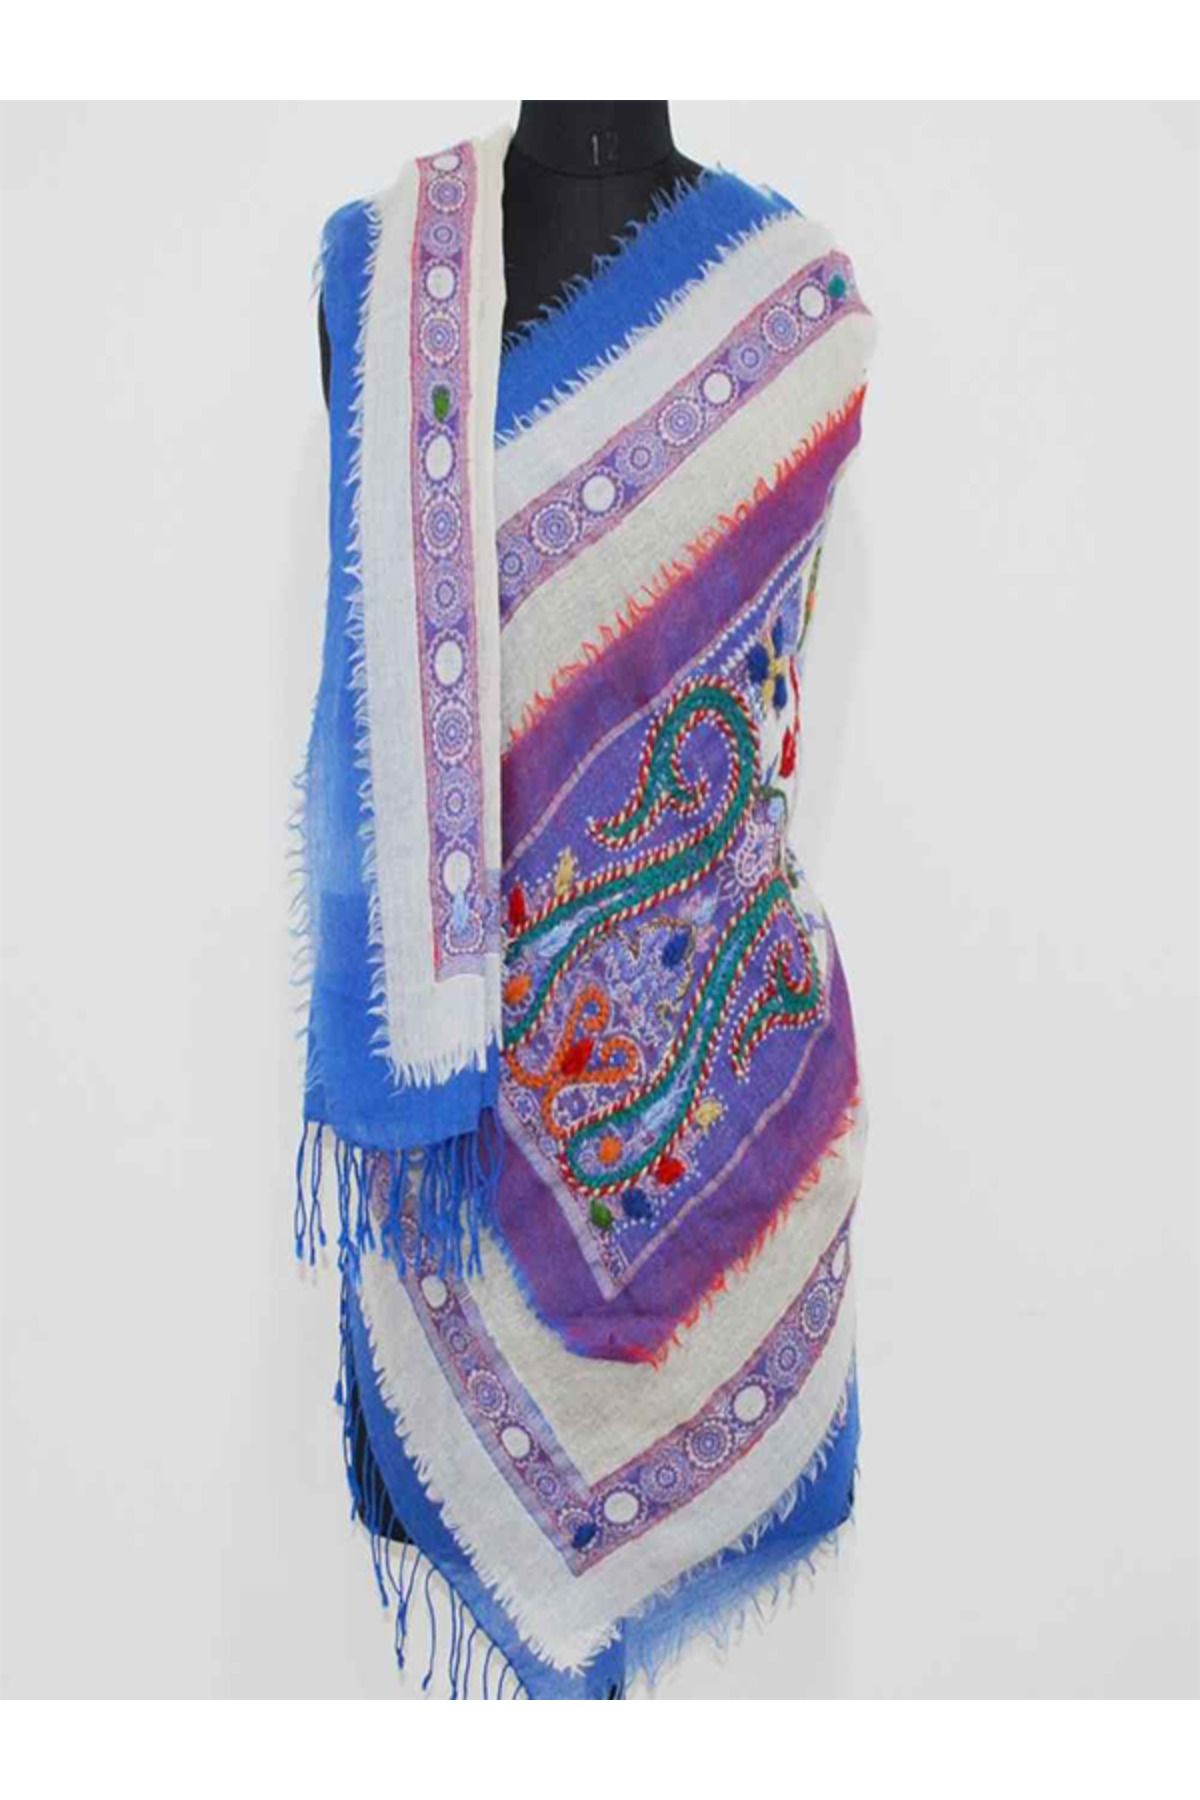 fiore fashion Cashmere boiled wool shawl knitted şal embroidered scarf cashmere shawl-flower